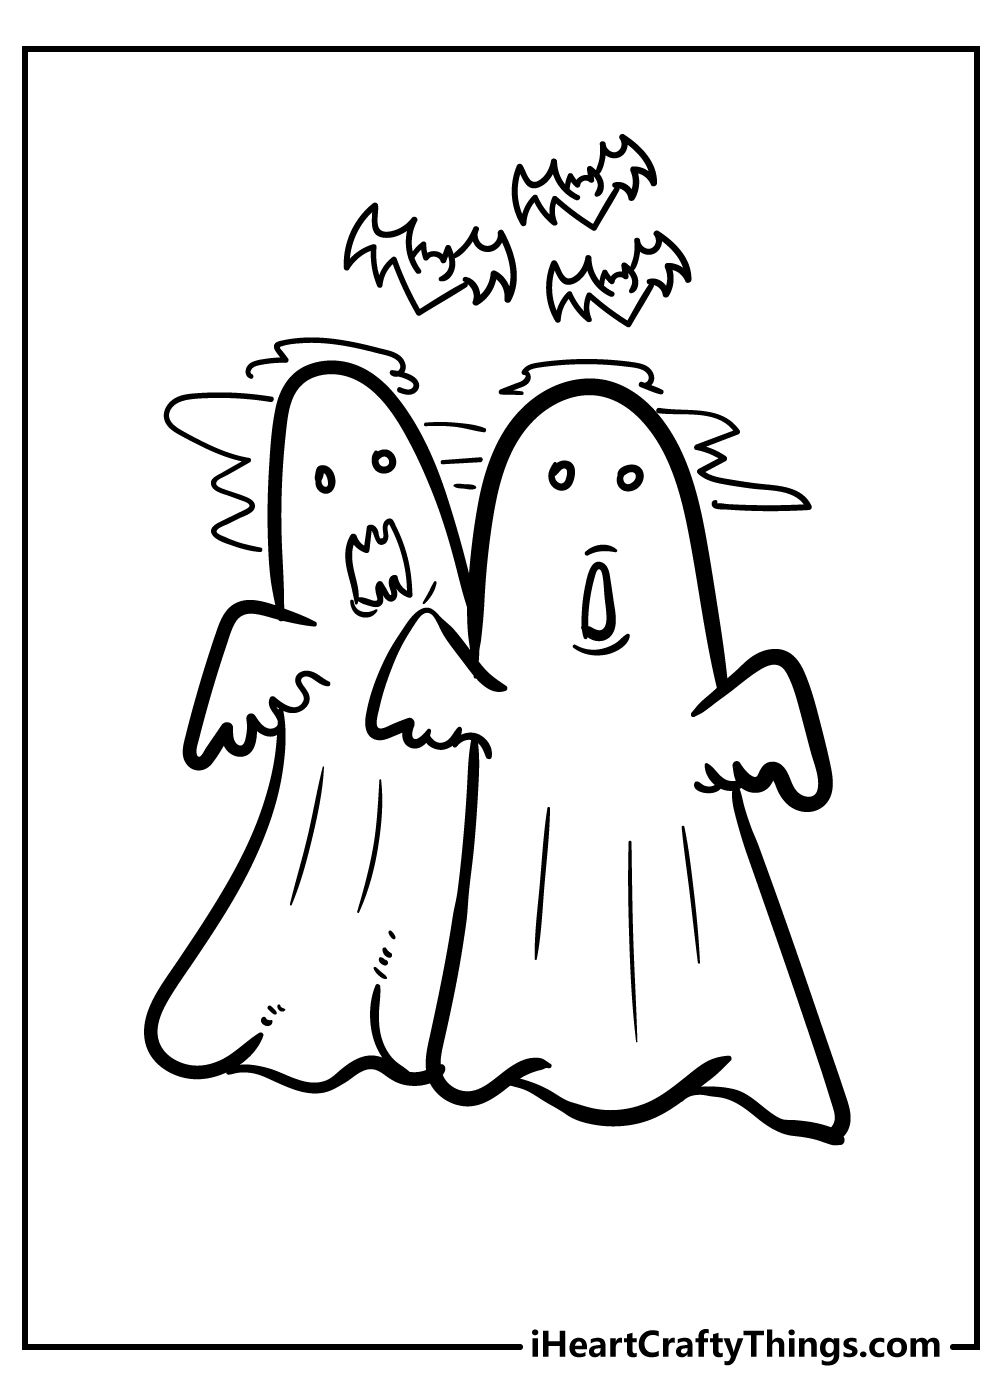 Ghost Coloring Pages for preschoolers free printable